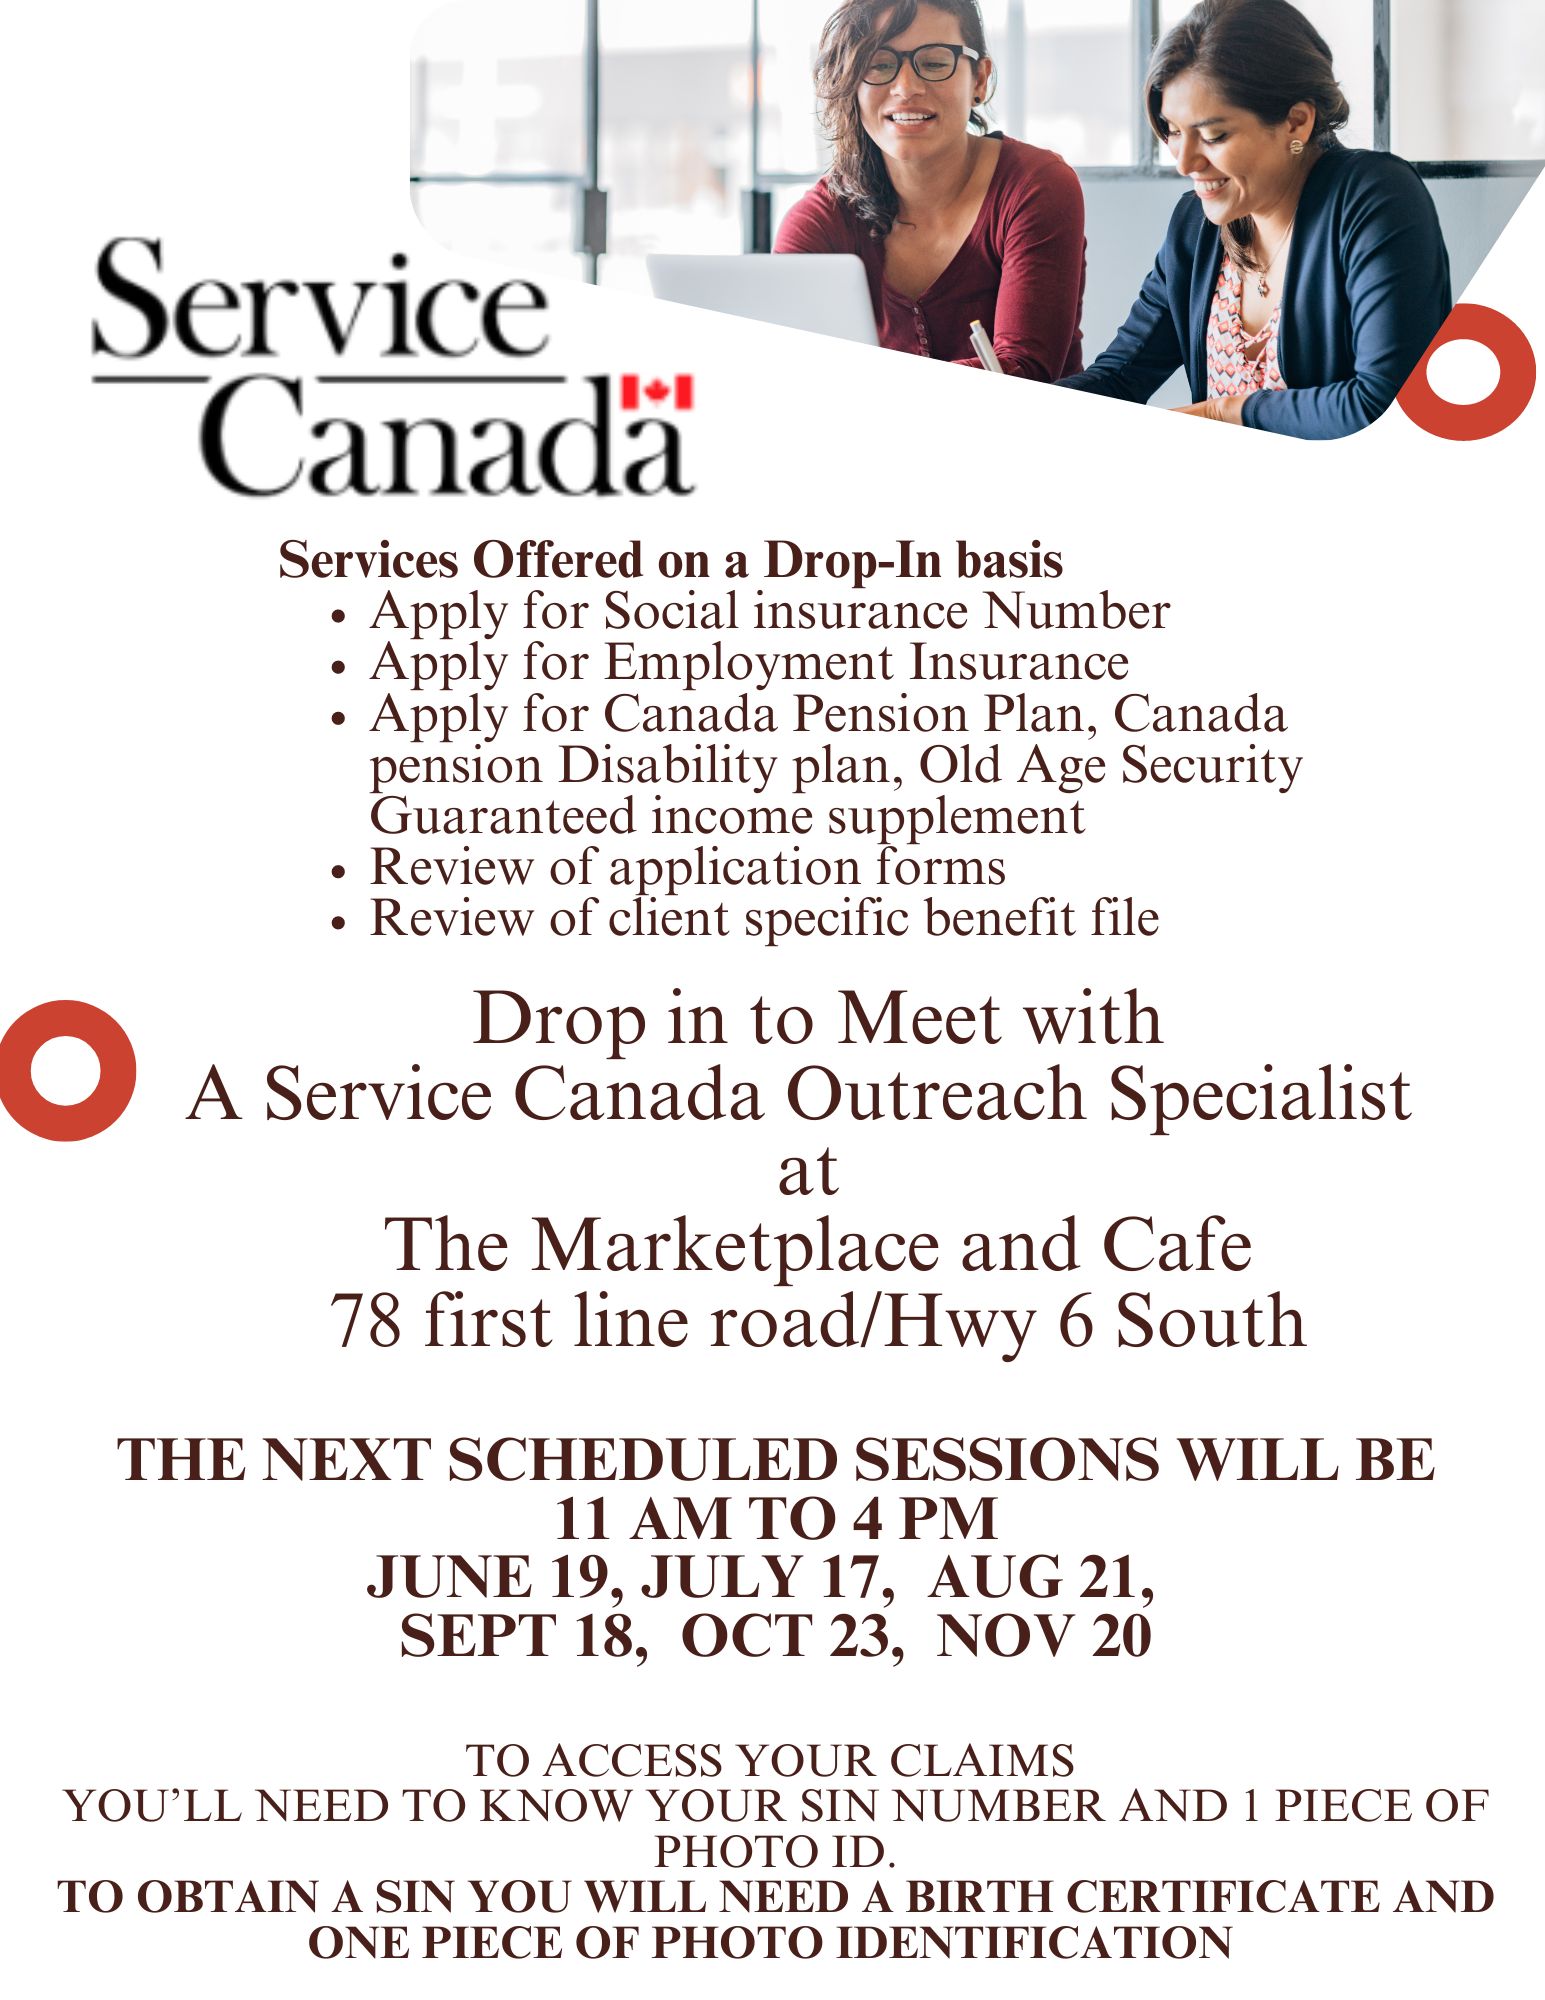 Service Canada Drop-ins New Date Added